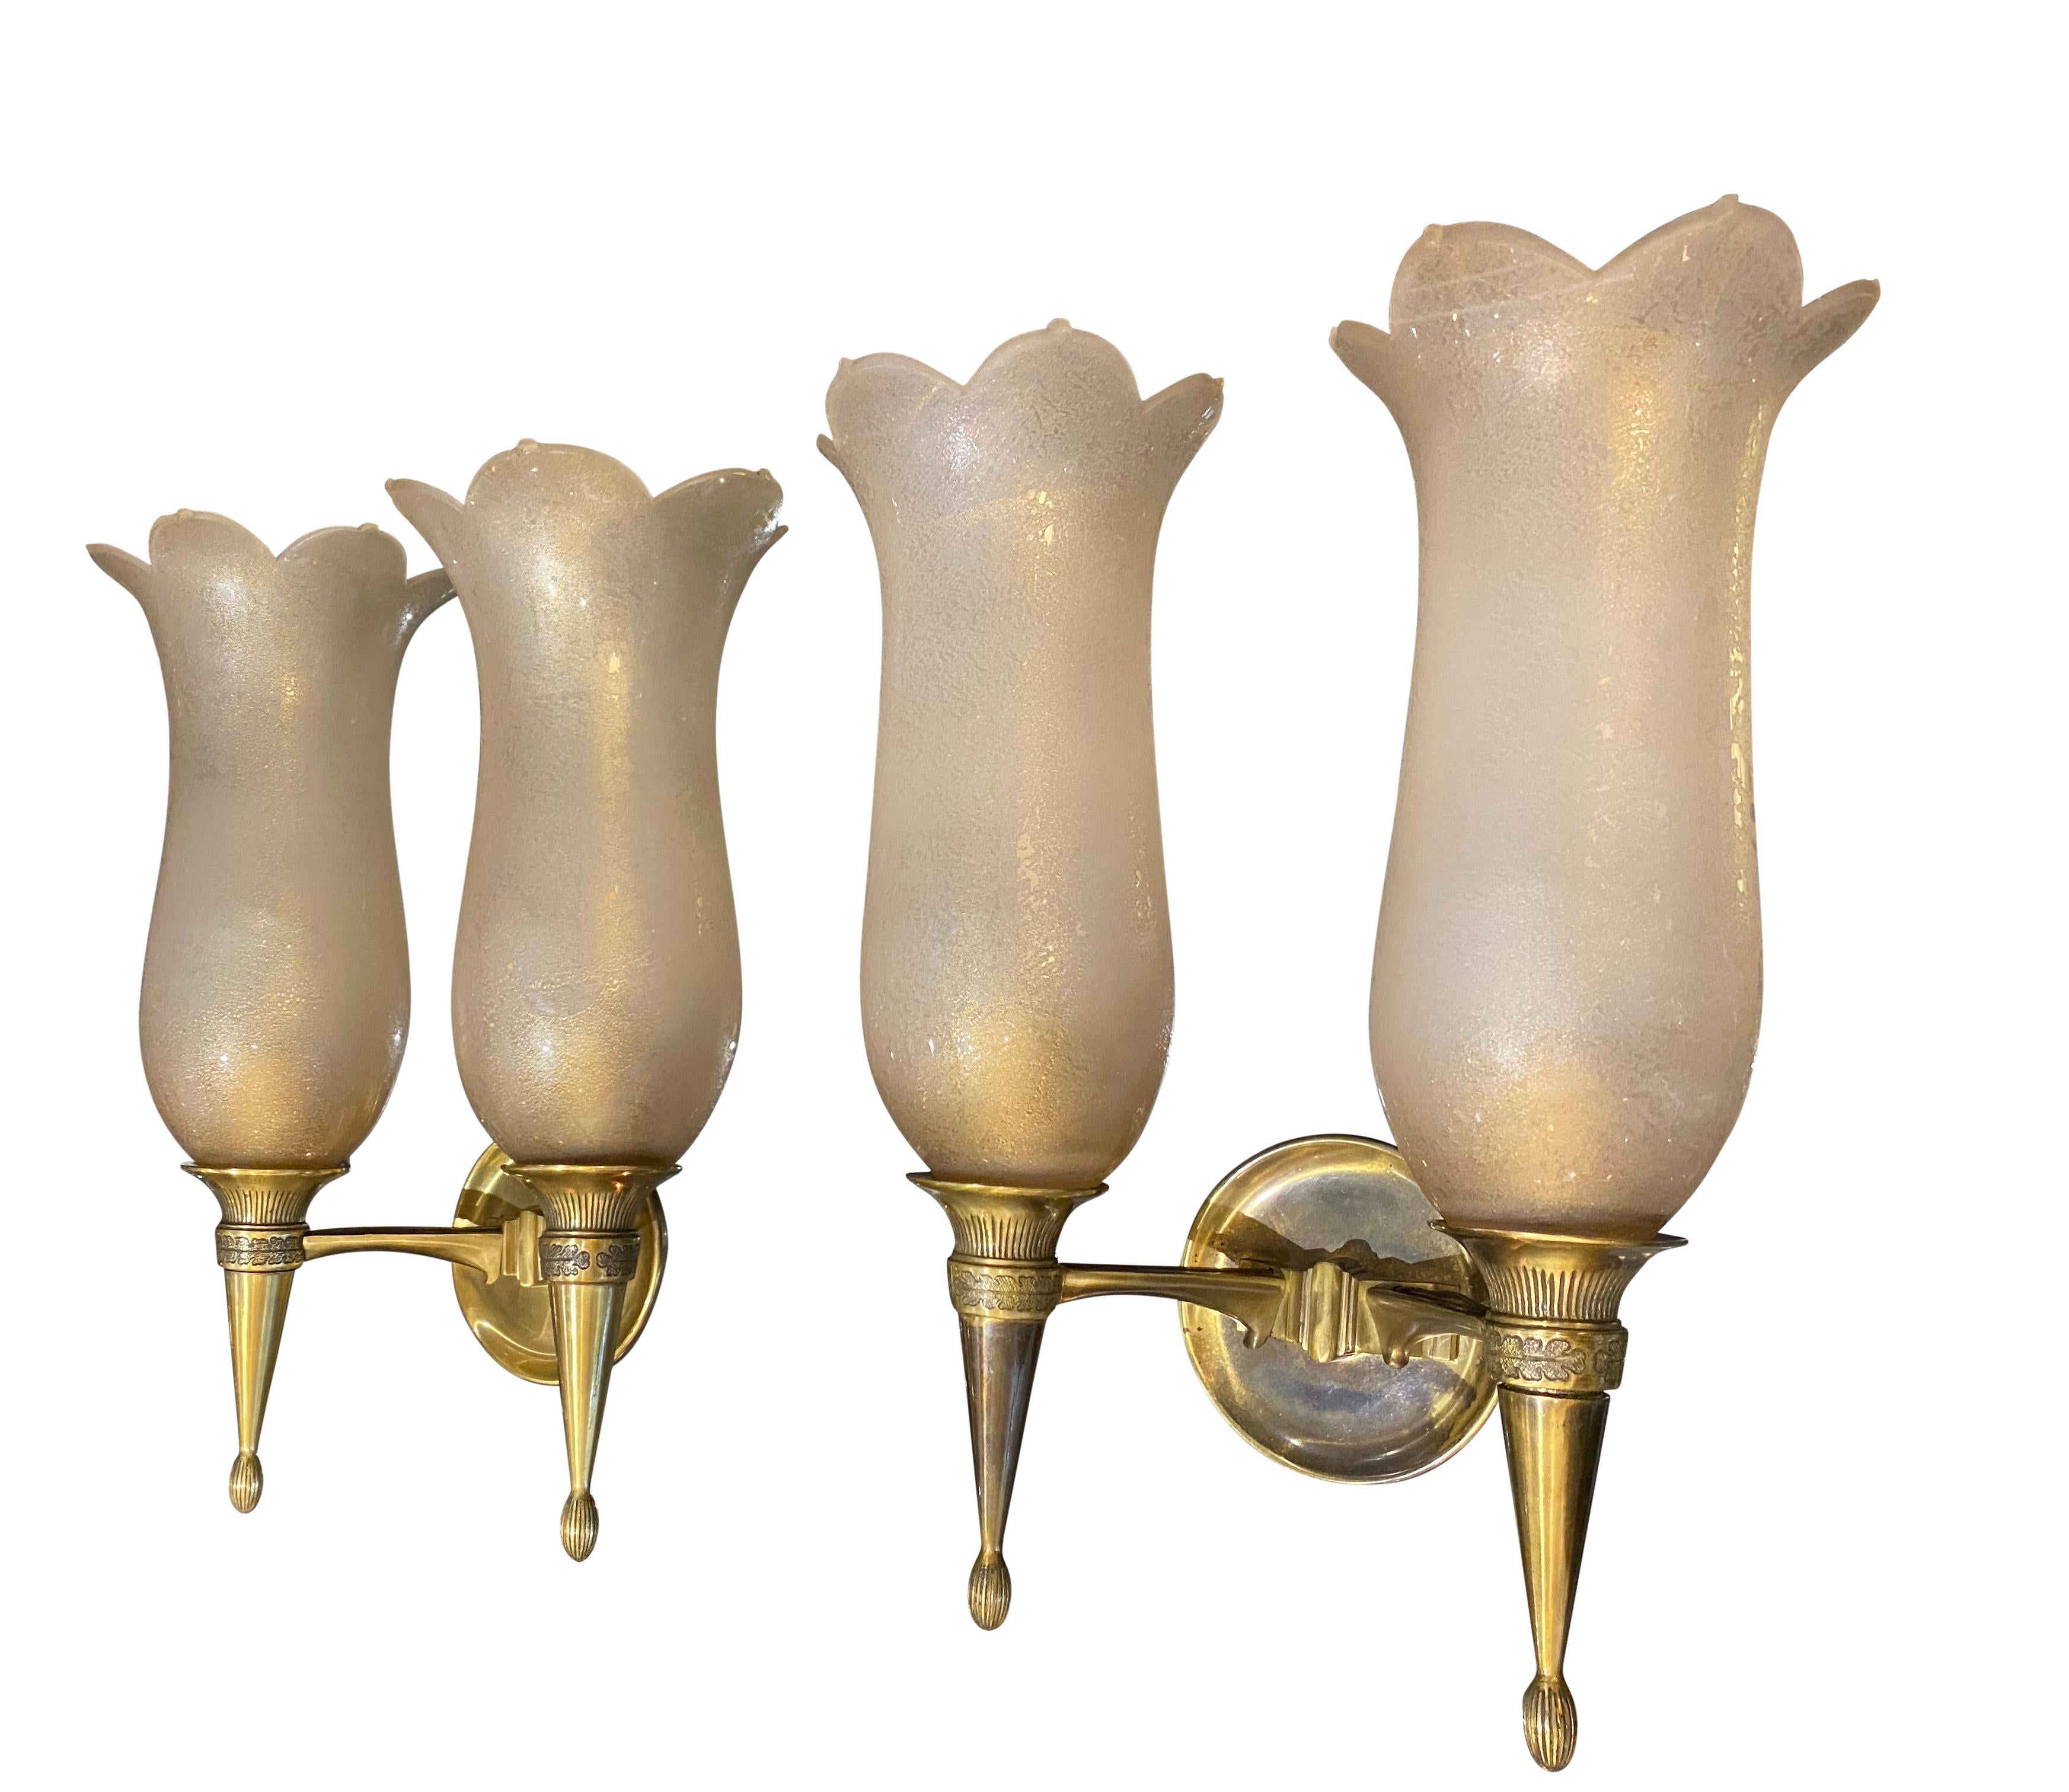 A rare pair of large wall sconces designed by Giovanni Gariboldi for Colli - made from gilded bronze & glasswork with golden inclusions by Archemide Seguso - Produced by Colli Co, Turin.

  